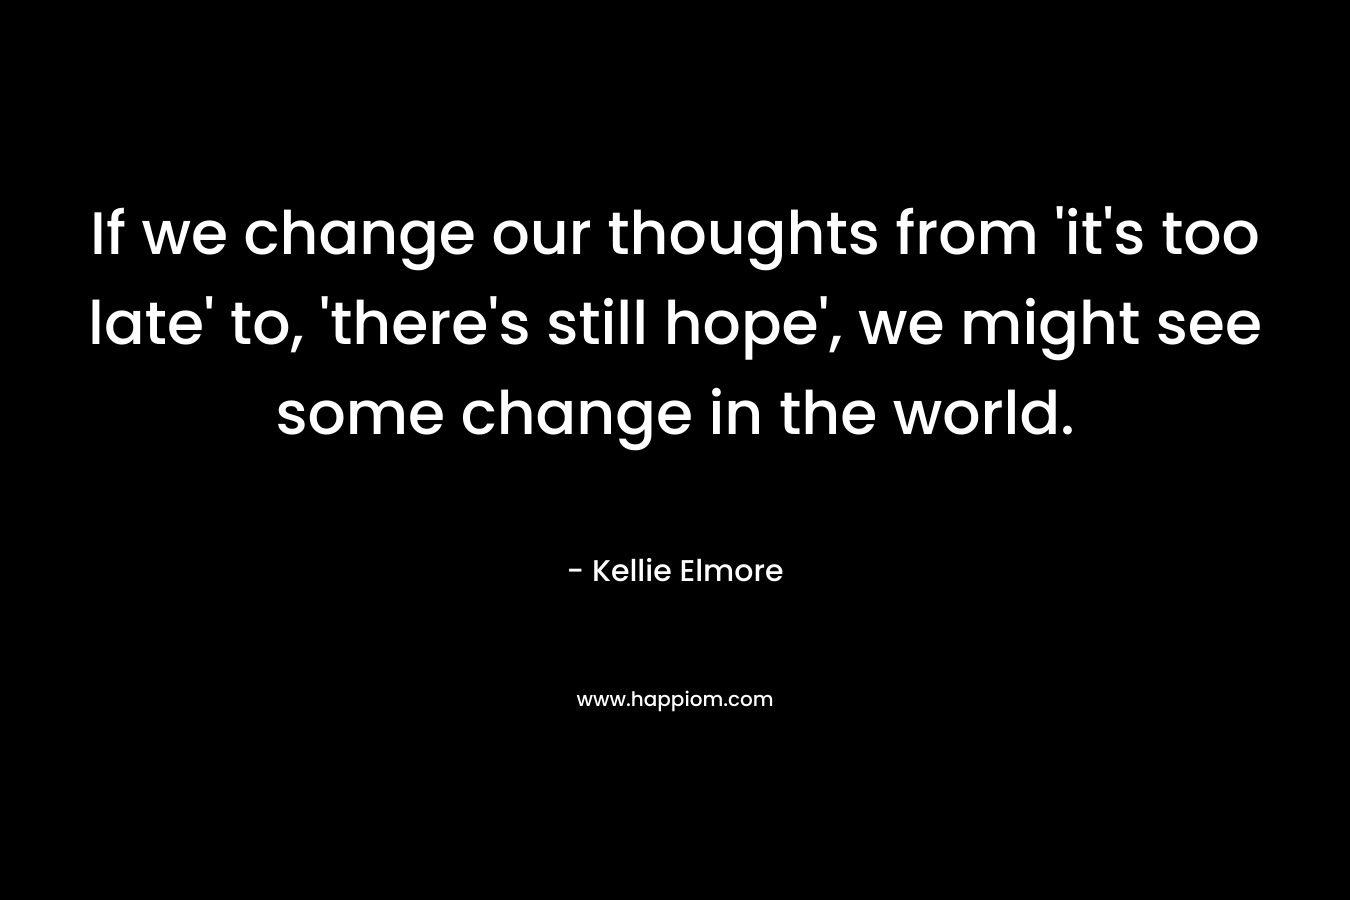 If we change our thoughts from 'it's too late' to, 'there's still hope', we might see some change in the world.